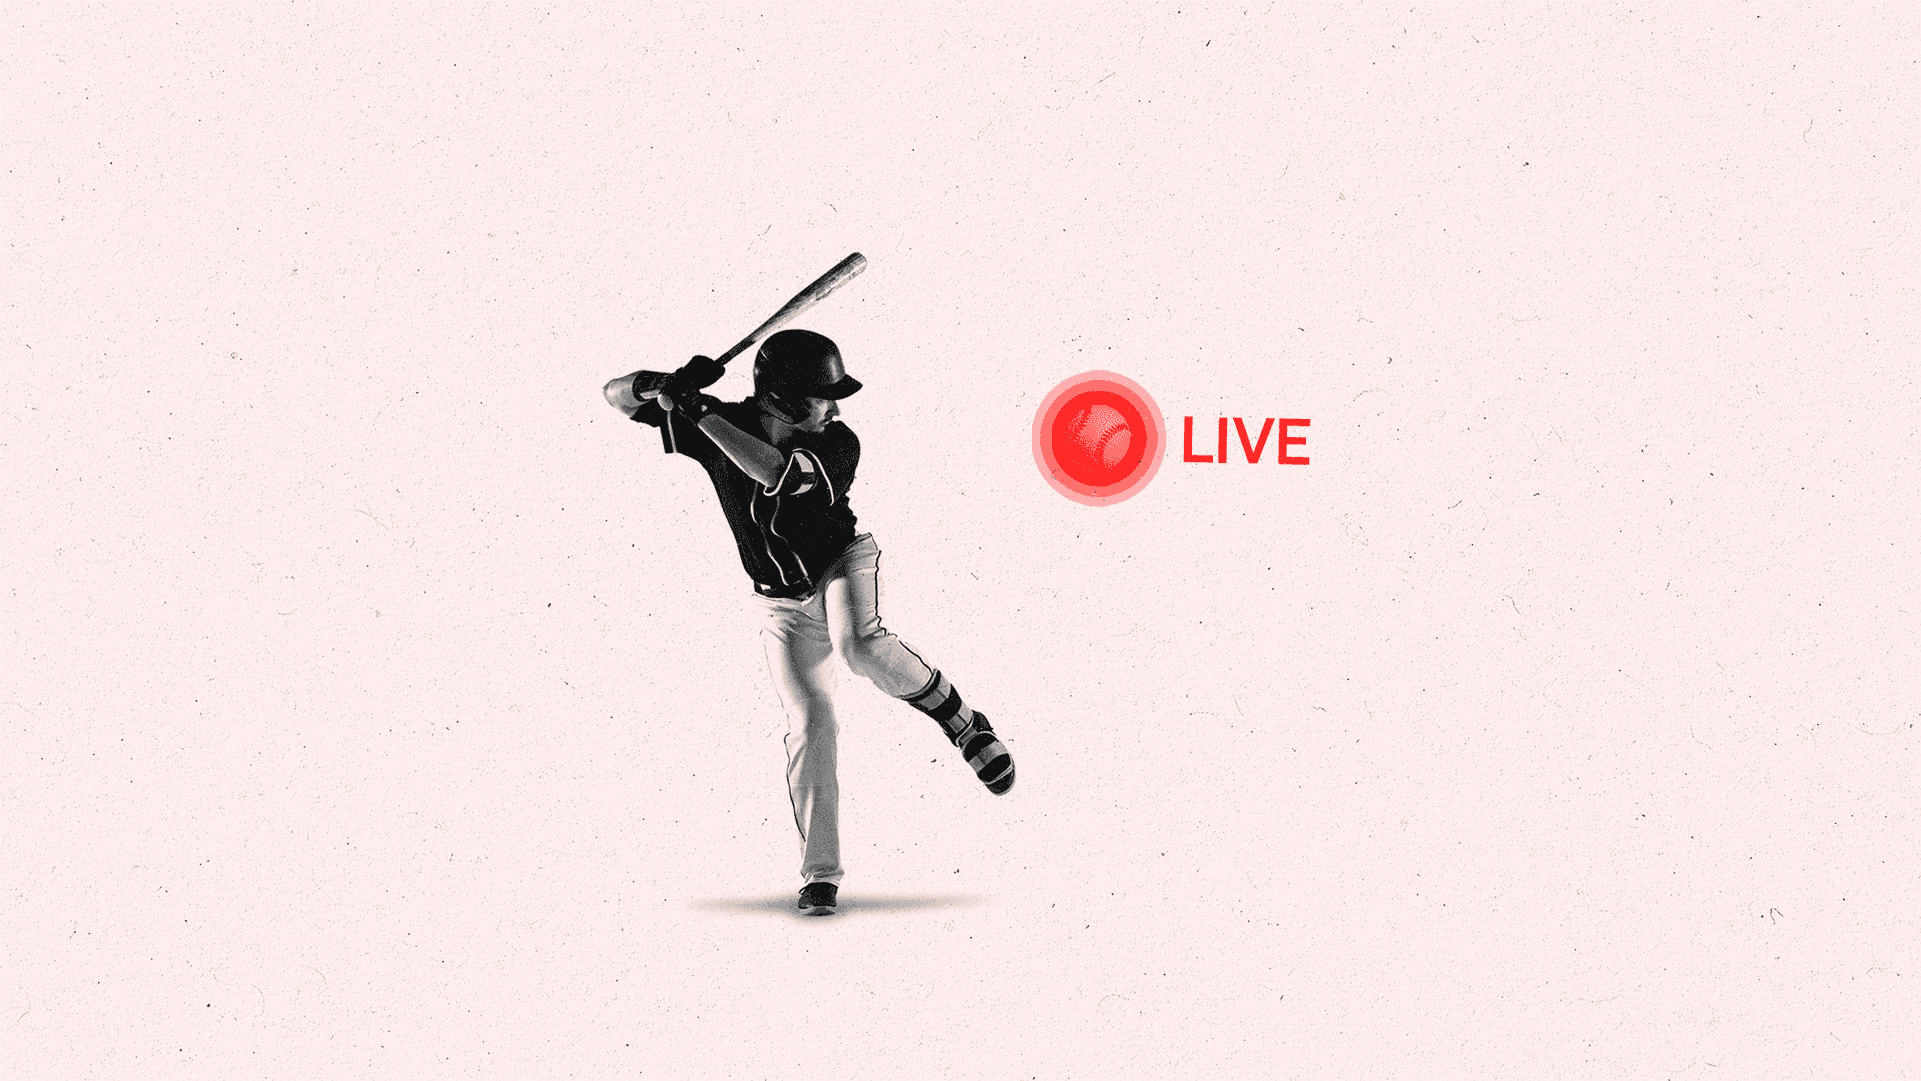 A baseball player posed at bat about to hit a red "live" icon.